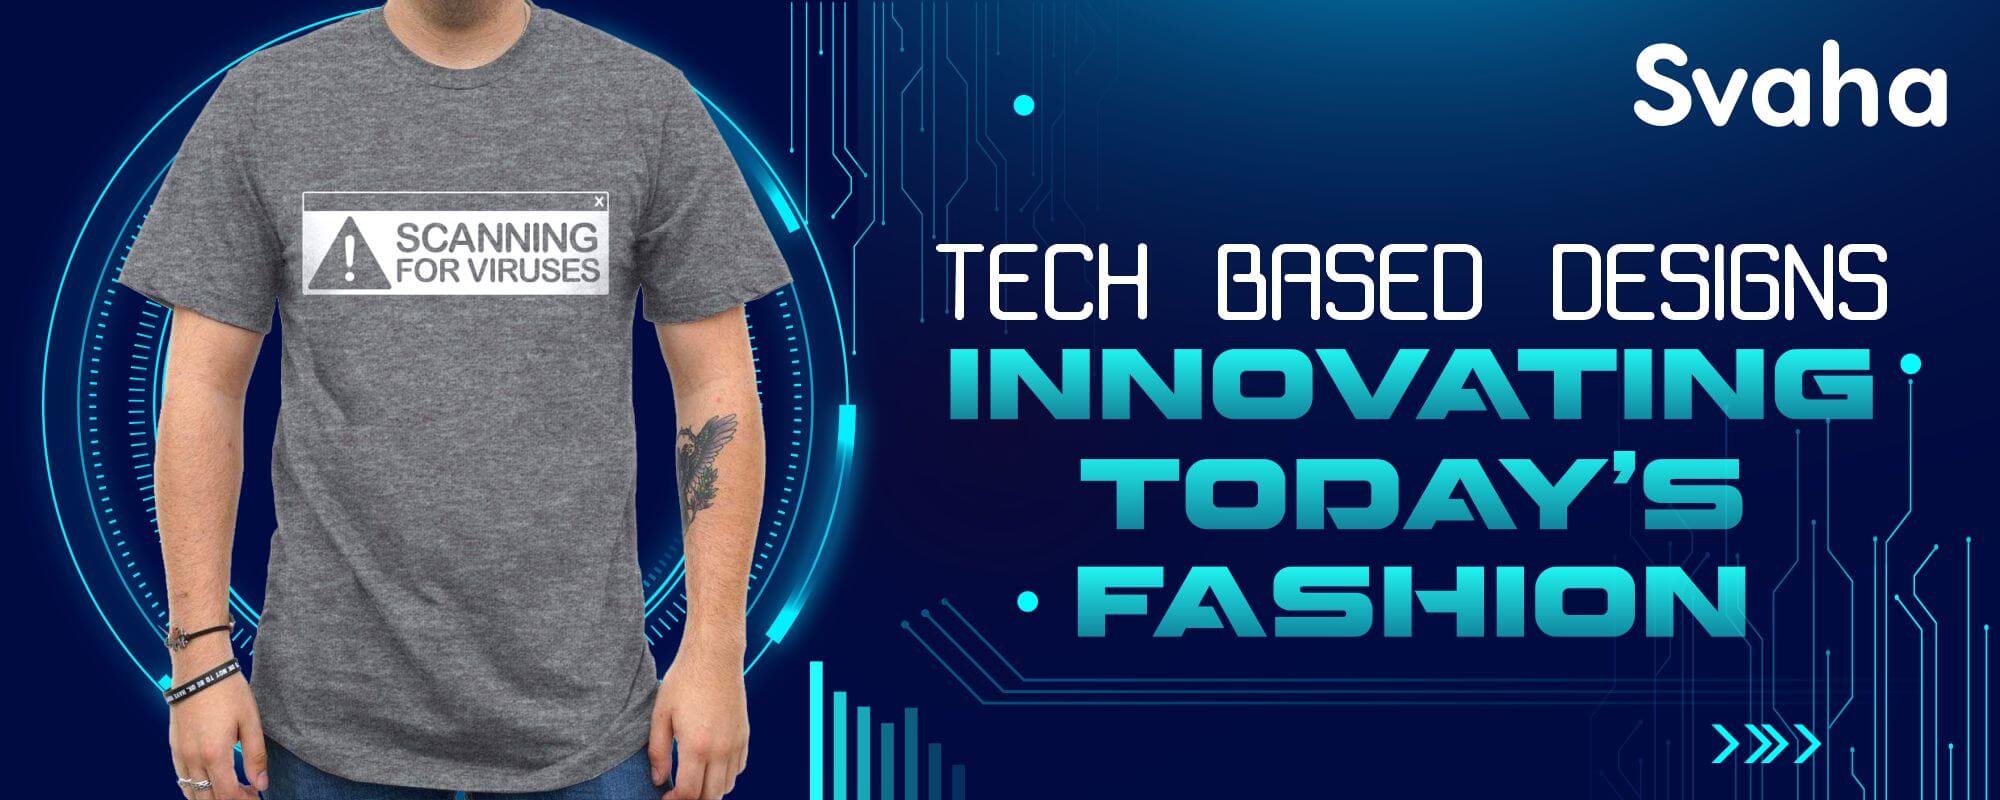 TECH BASED DESIGNS INNOVATING TODAY’S FASHION